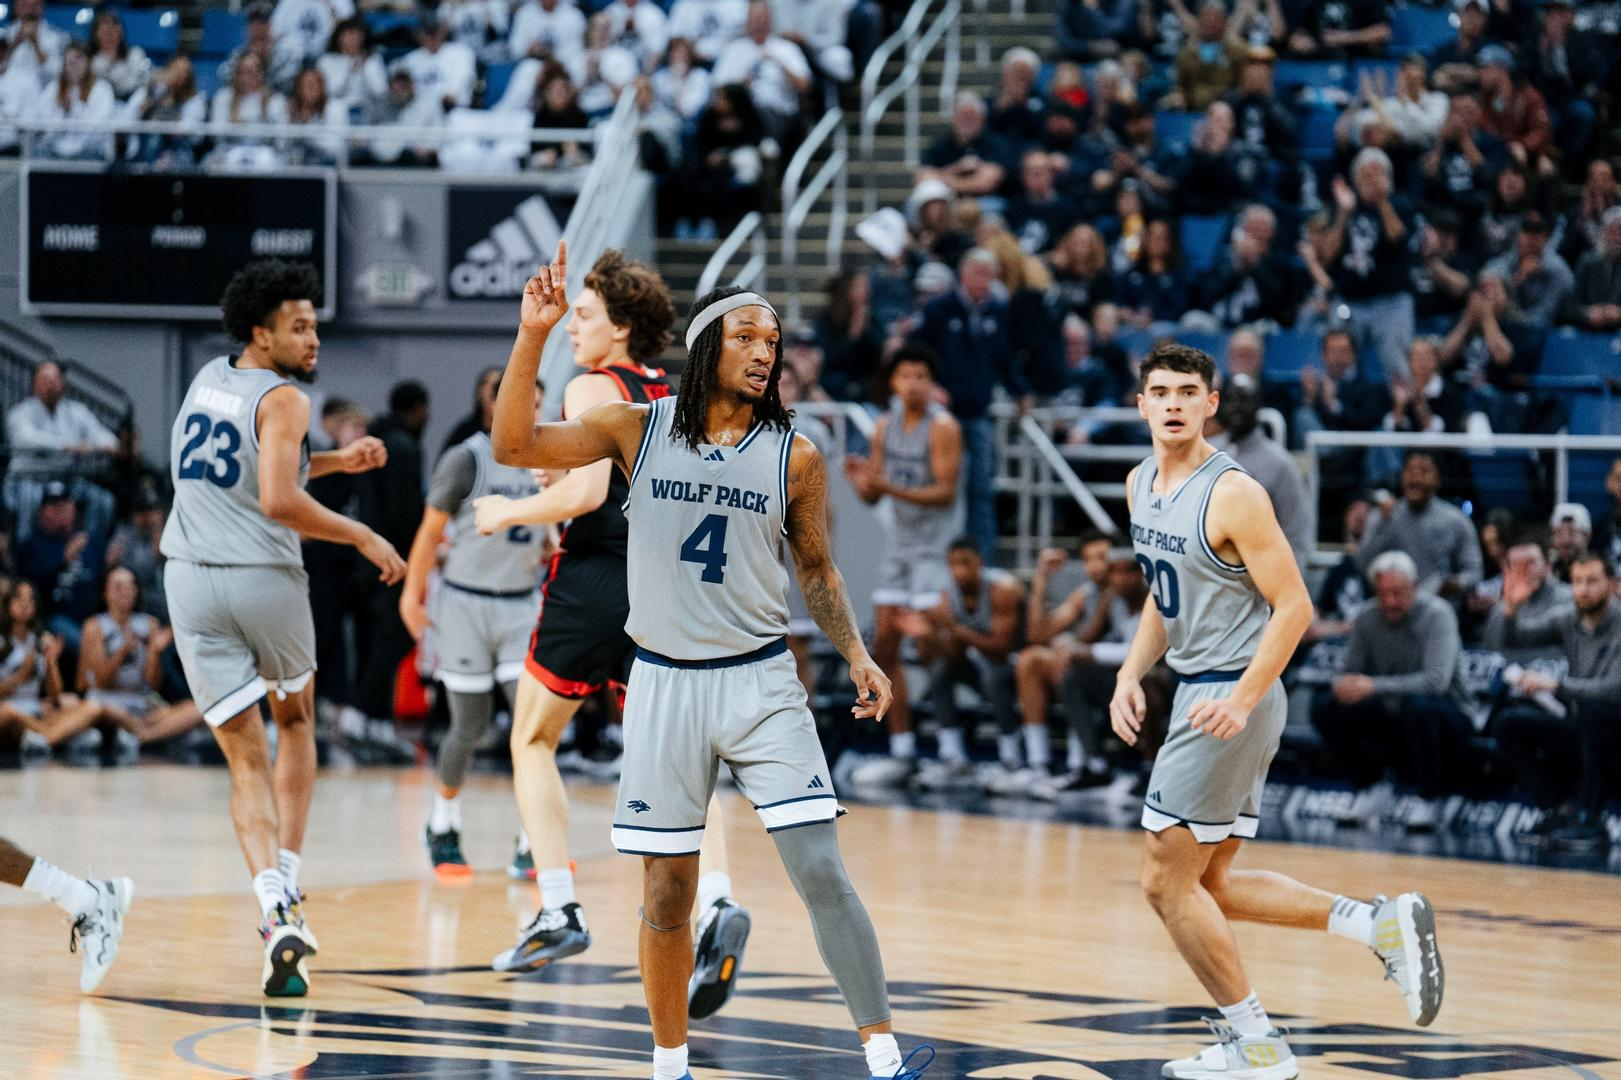 Coleman’s Clutch Bucket Propels Nevada to Historical 70-66 Overtime Victory Against #24 San Diego State